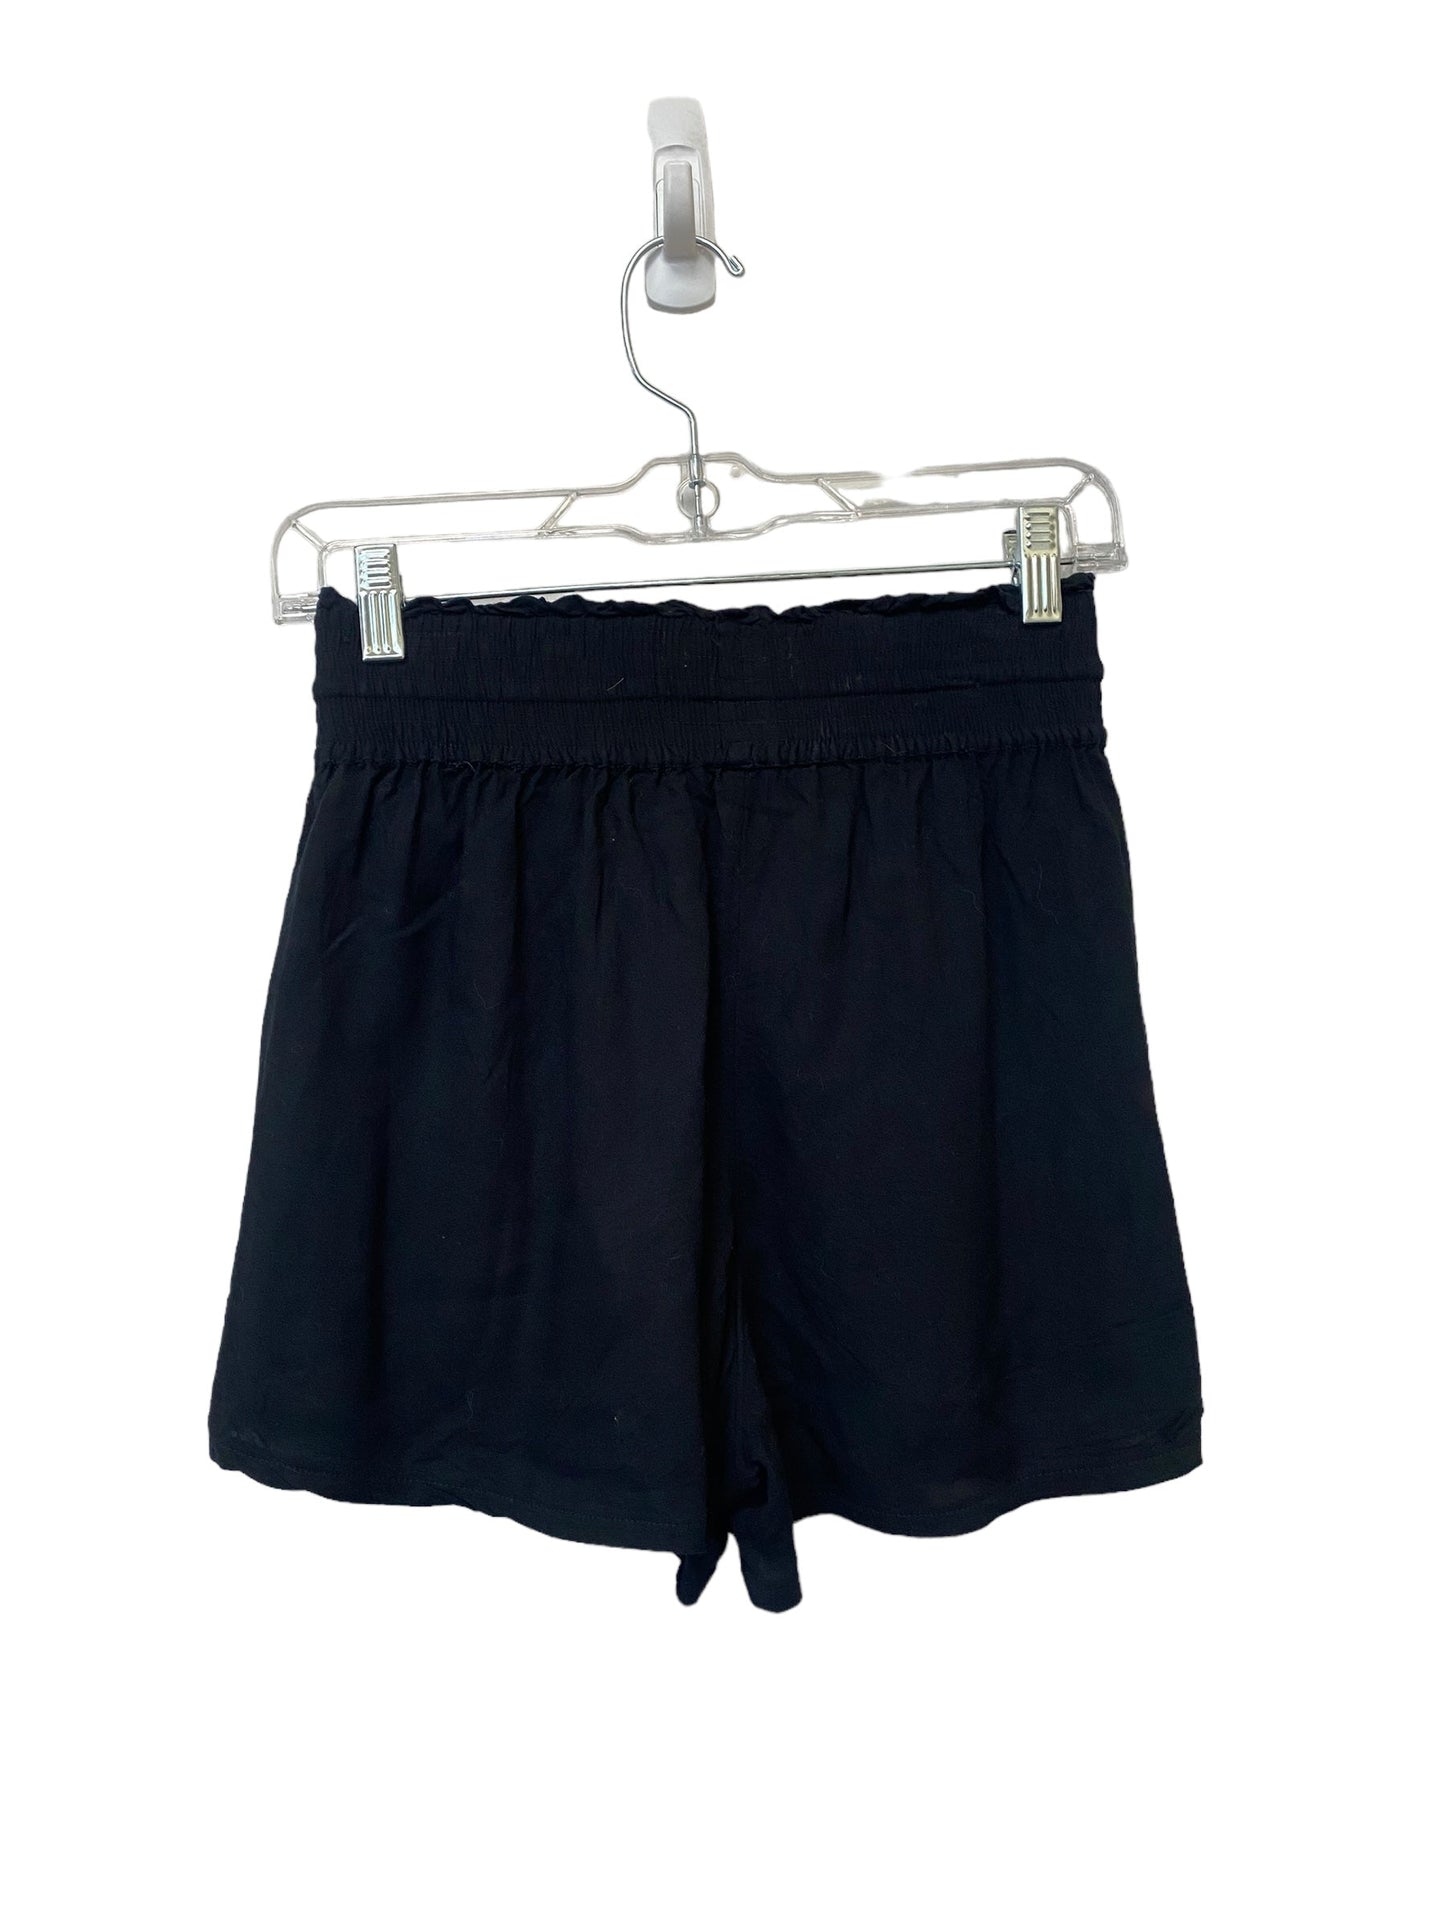 Black Shorts Abercrombie And Fitch, Size Xs